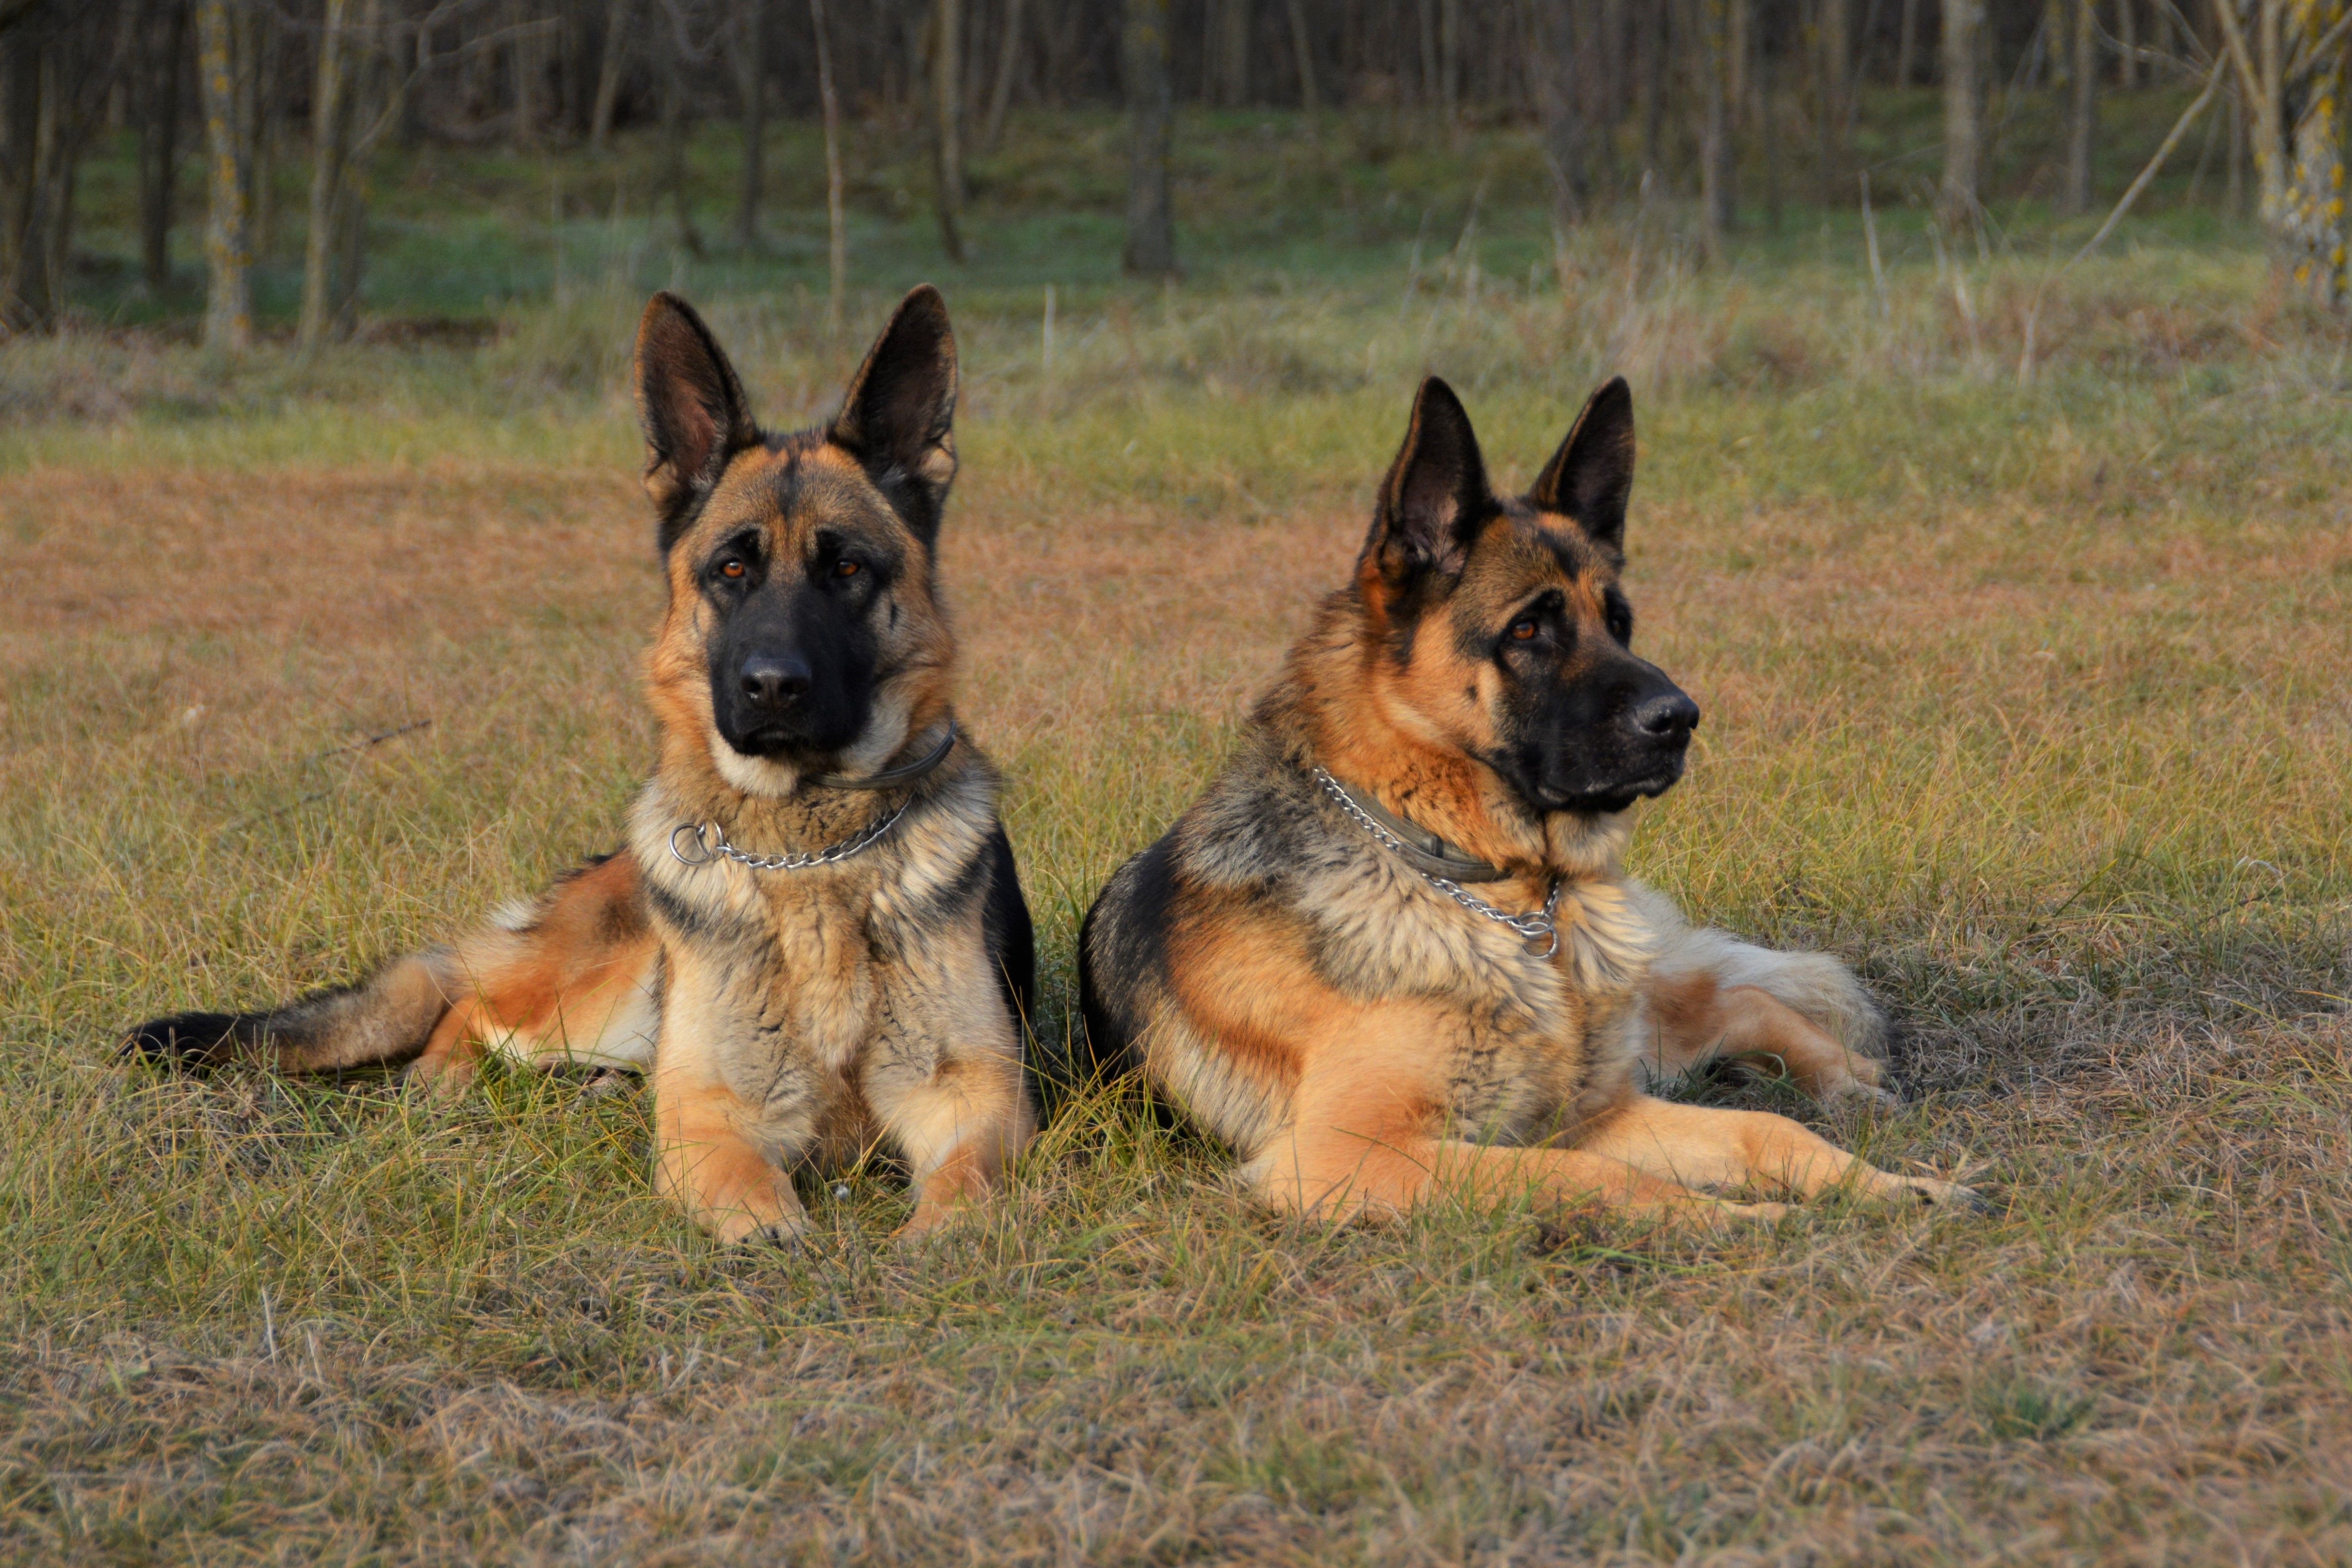 Watch Dog Vs Guard Dog: Which One Provides Better Security?